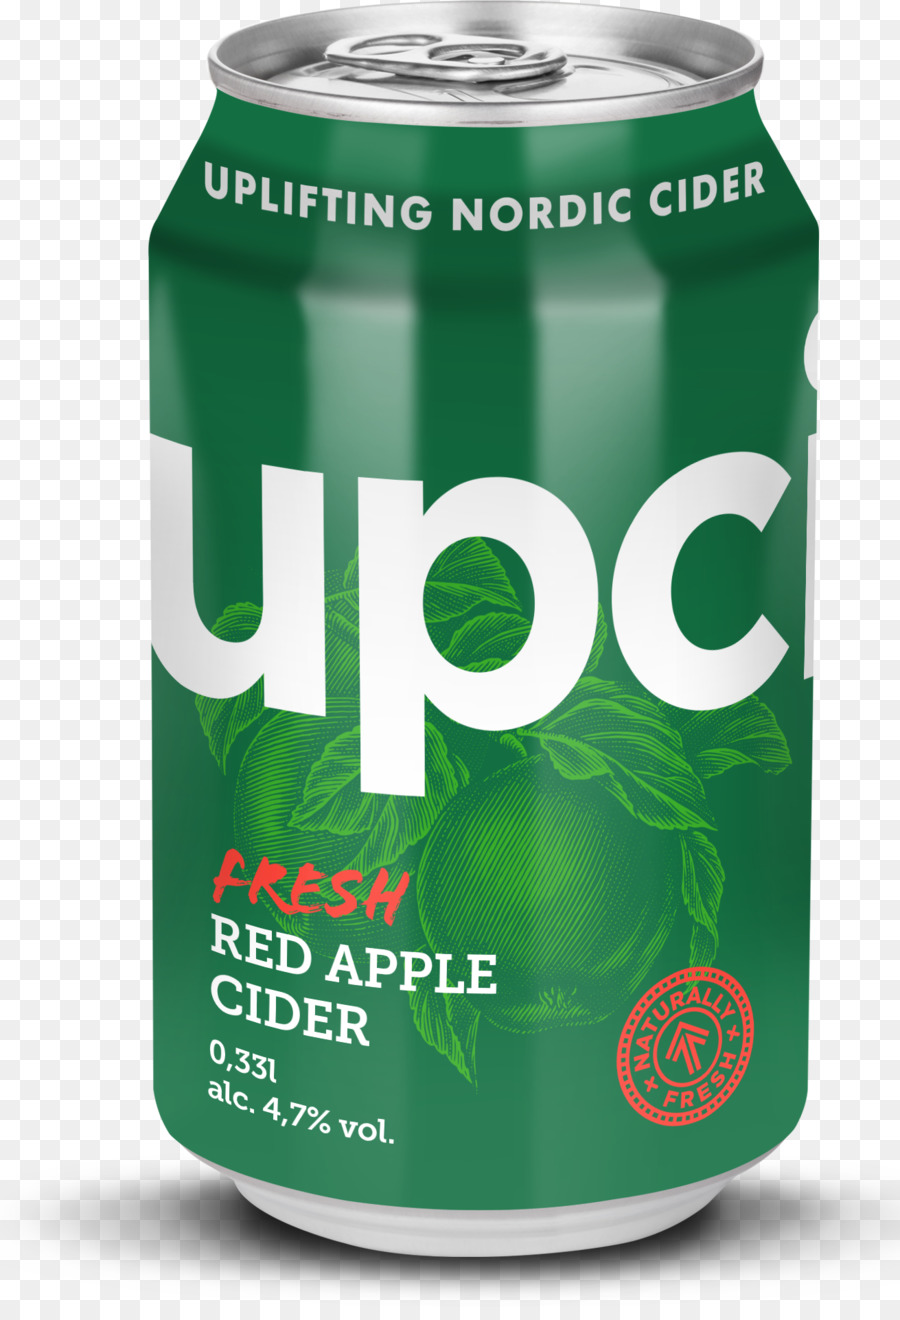 Upcider，ไซ PNG